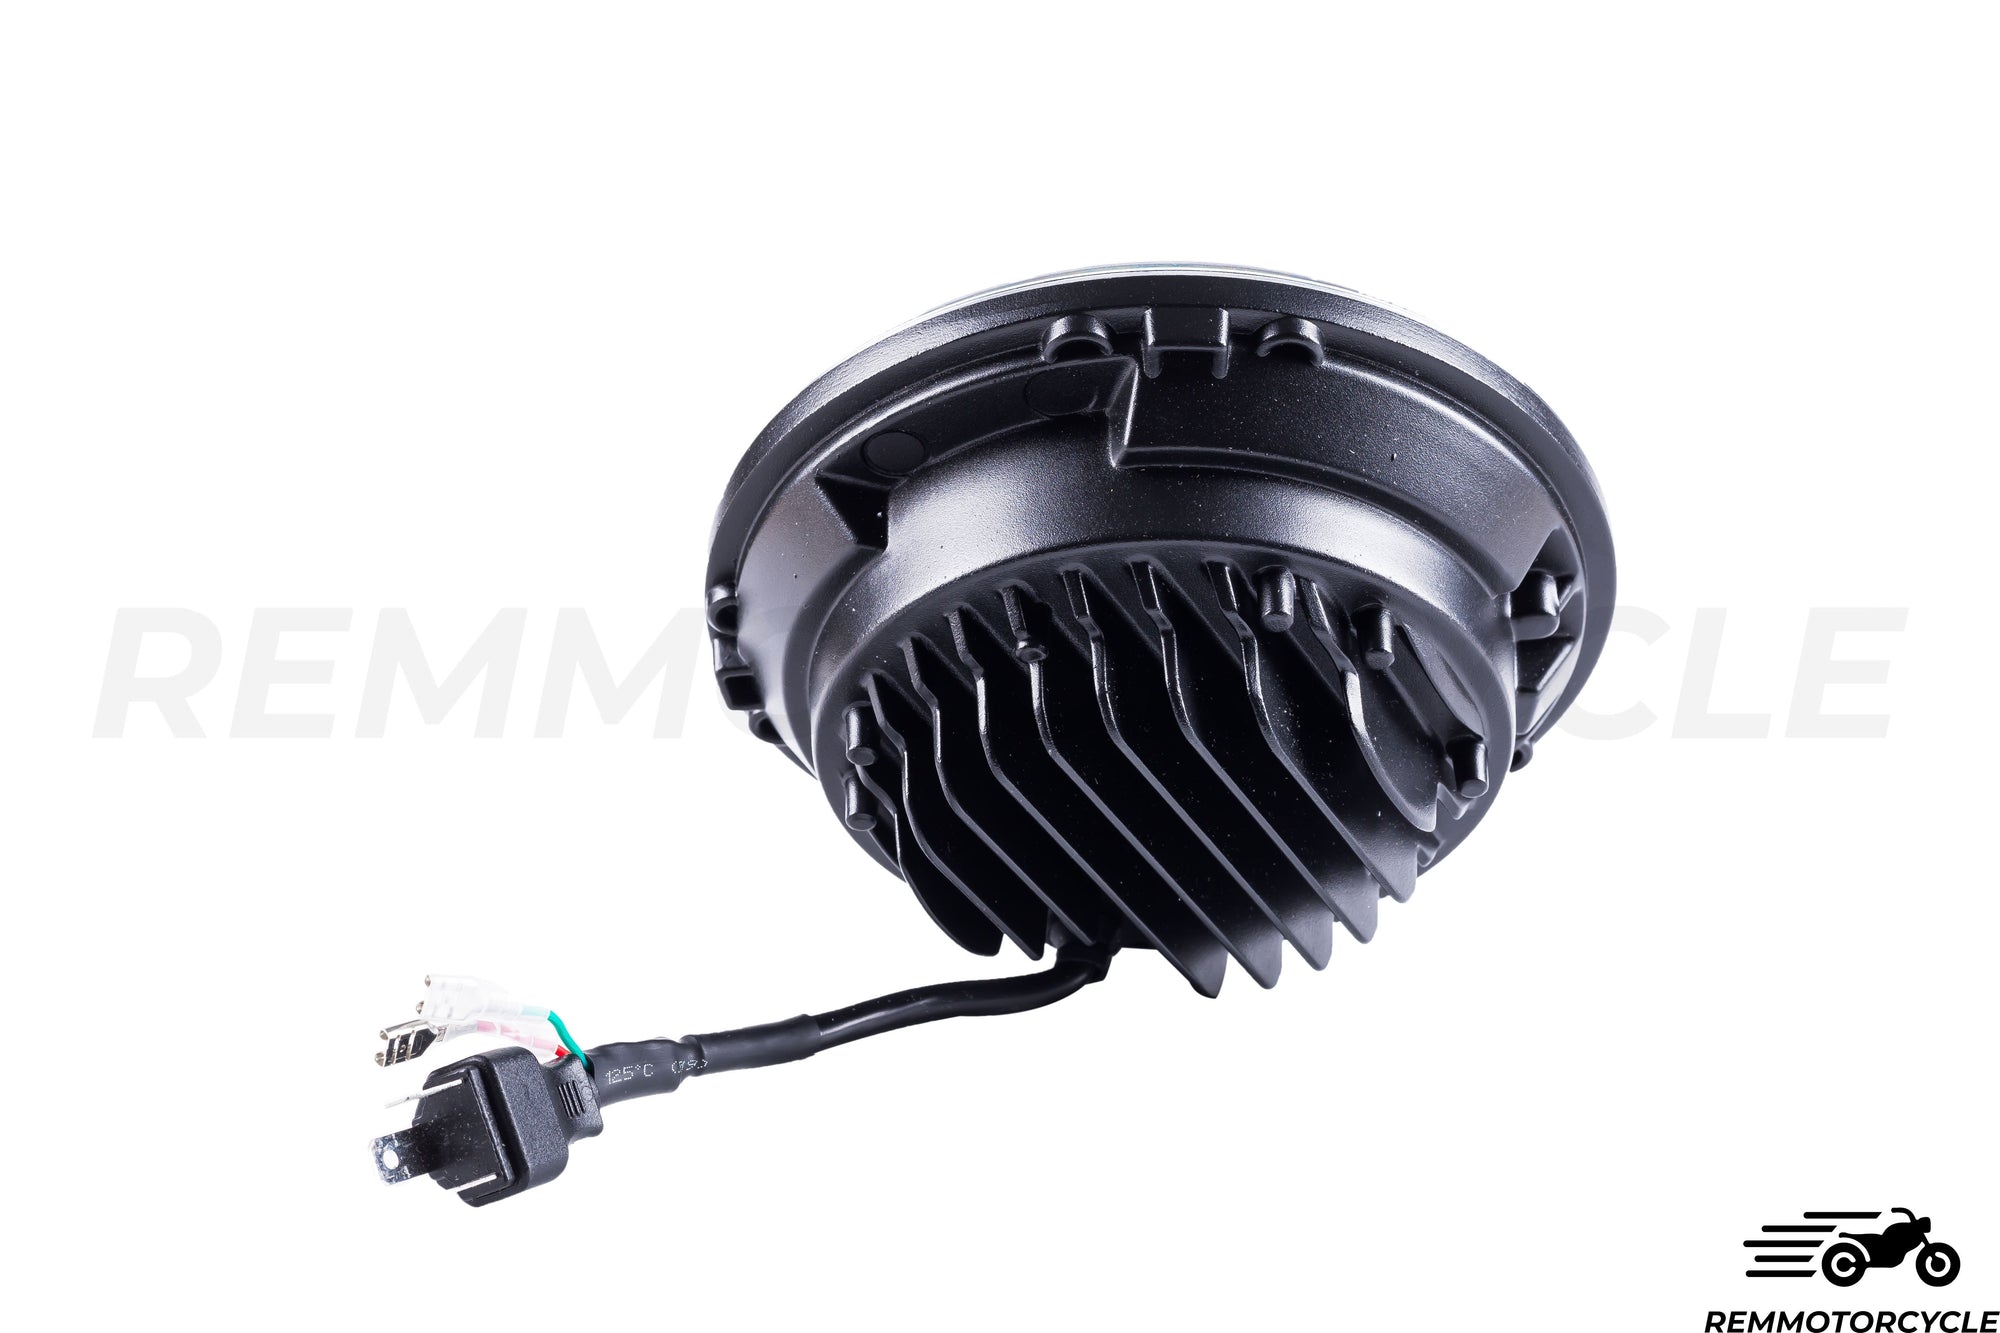 20 cm Multi Multi Motorcycle LED lighthouse with integrated indicators